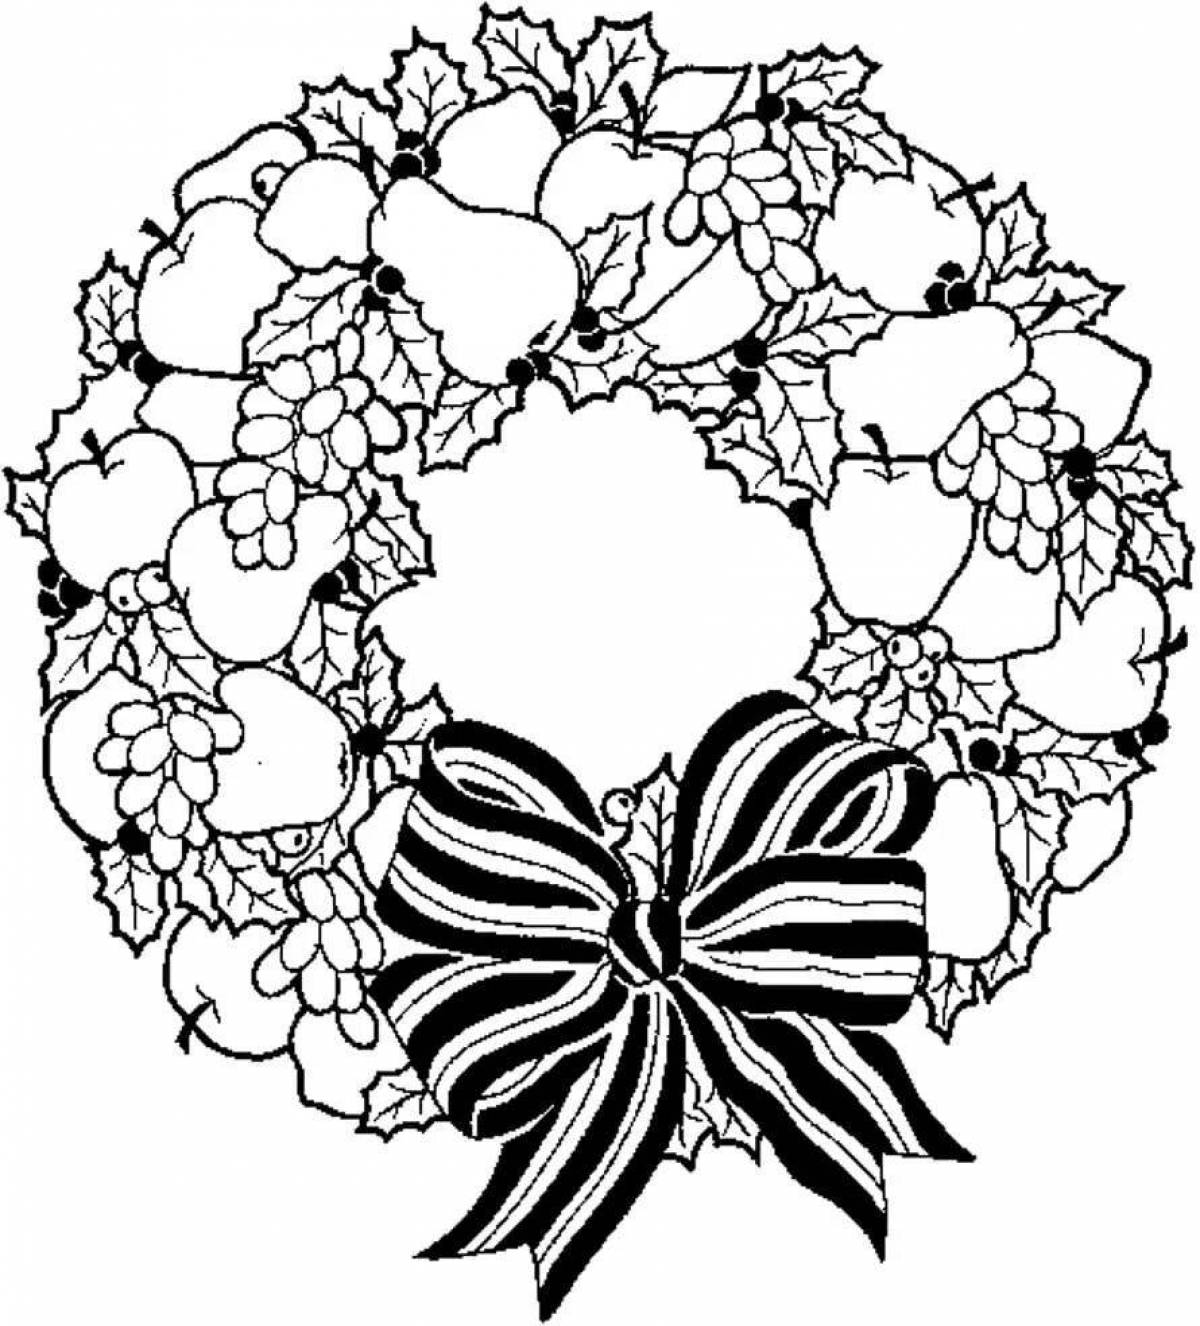 Coloring page playful wreath of flowers